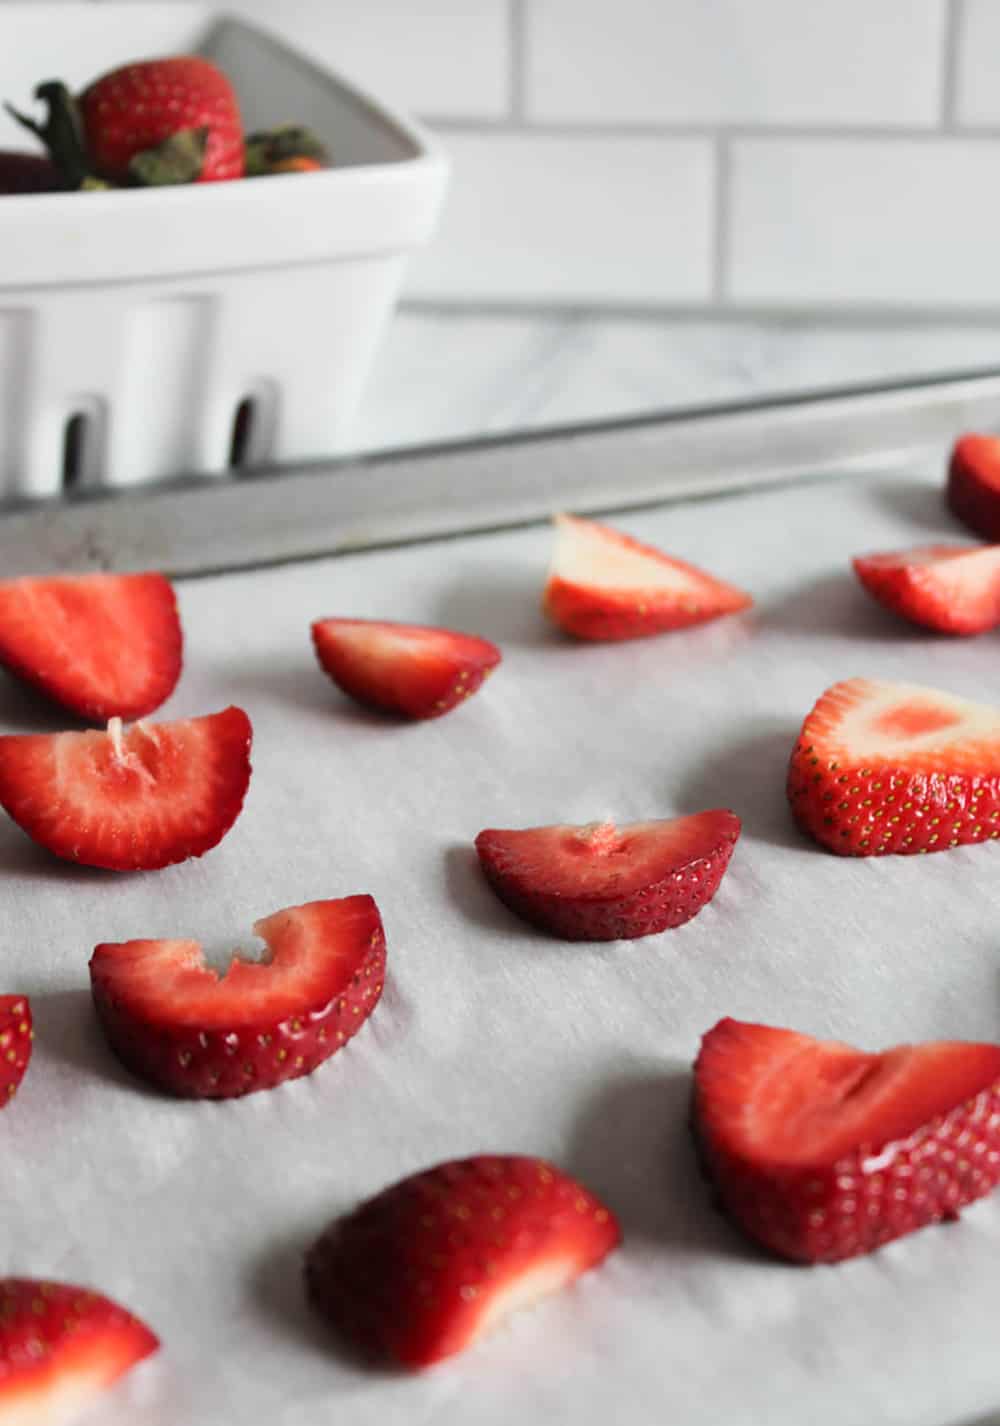 A PICTURE of strawberry slices on a baking tray